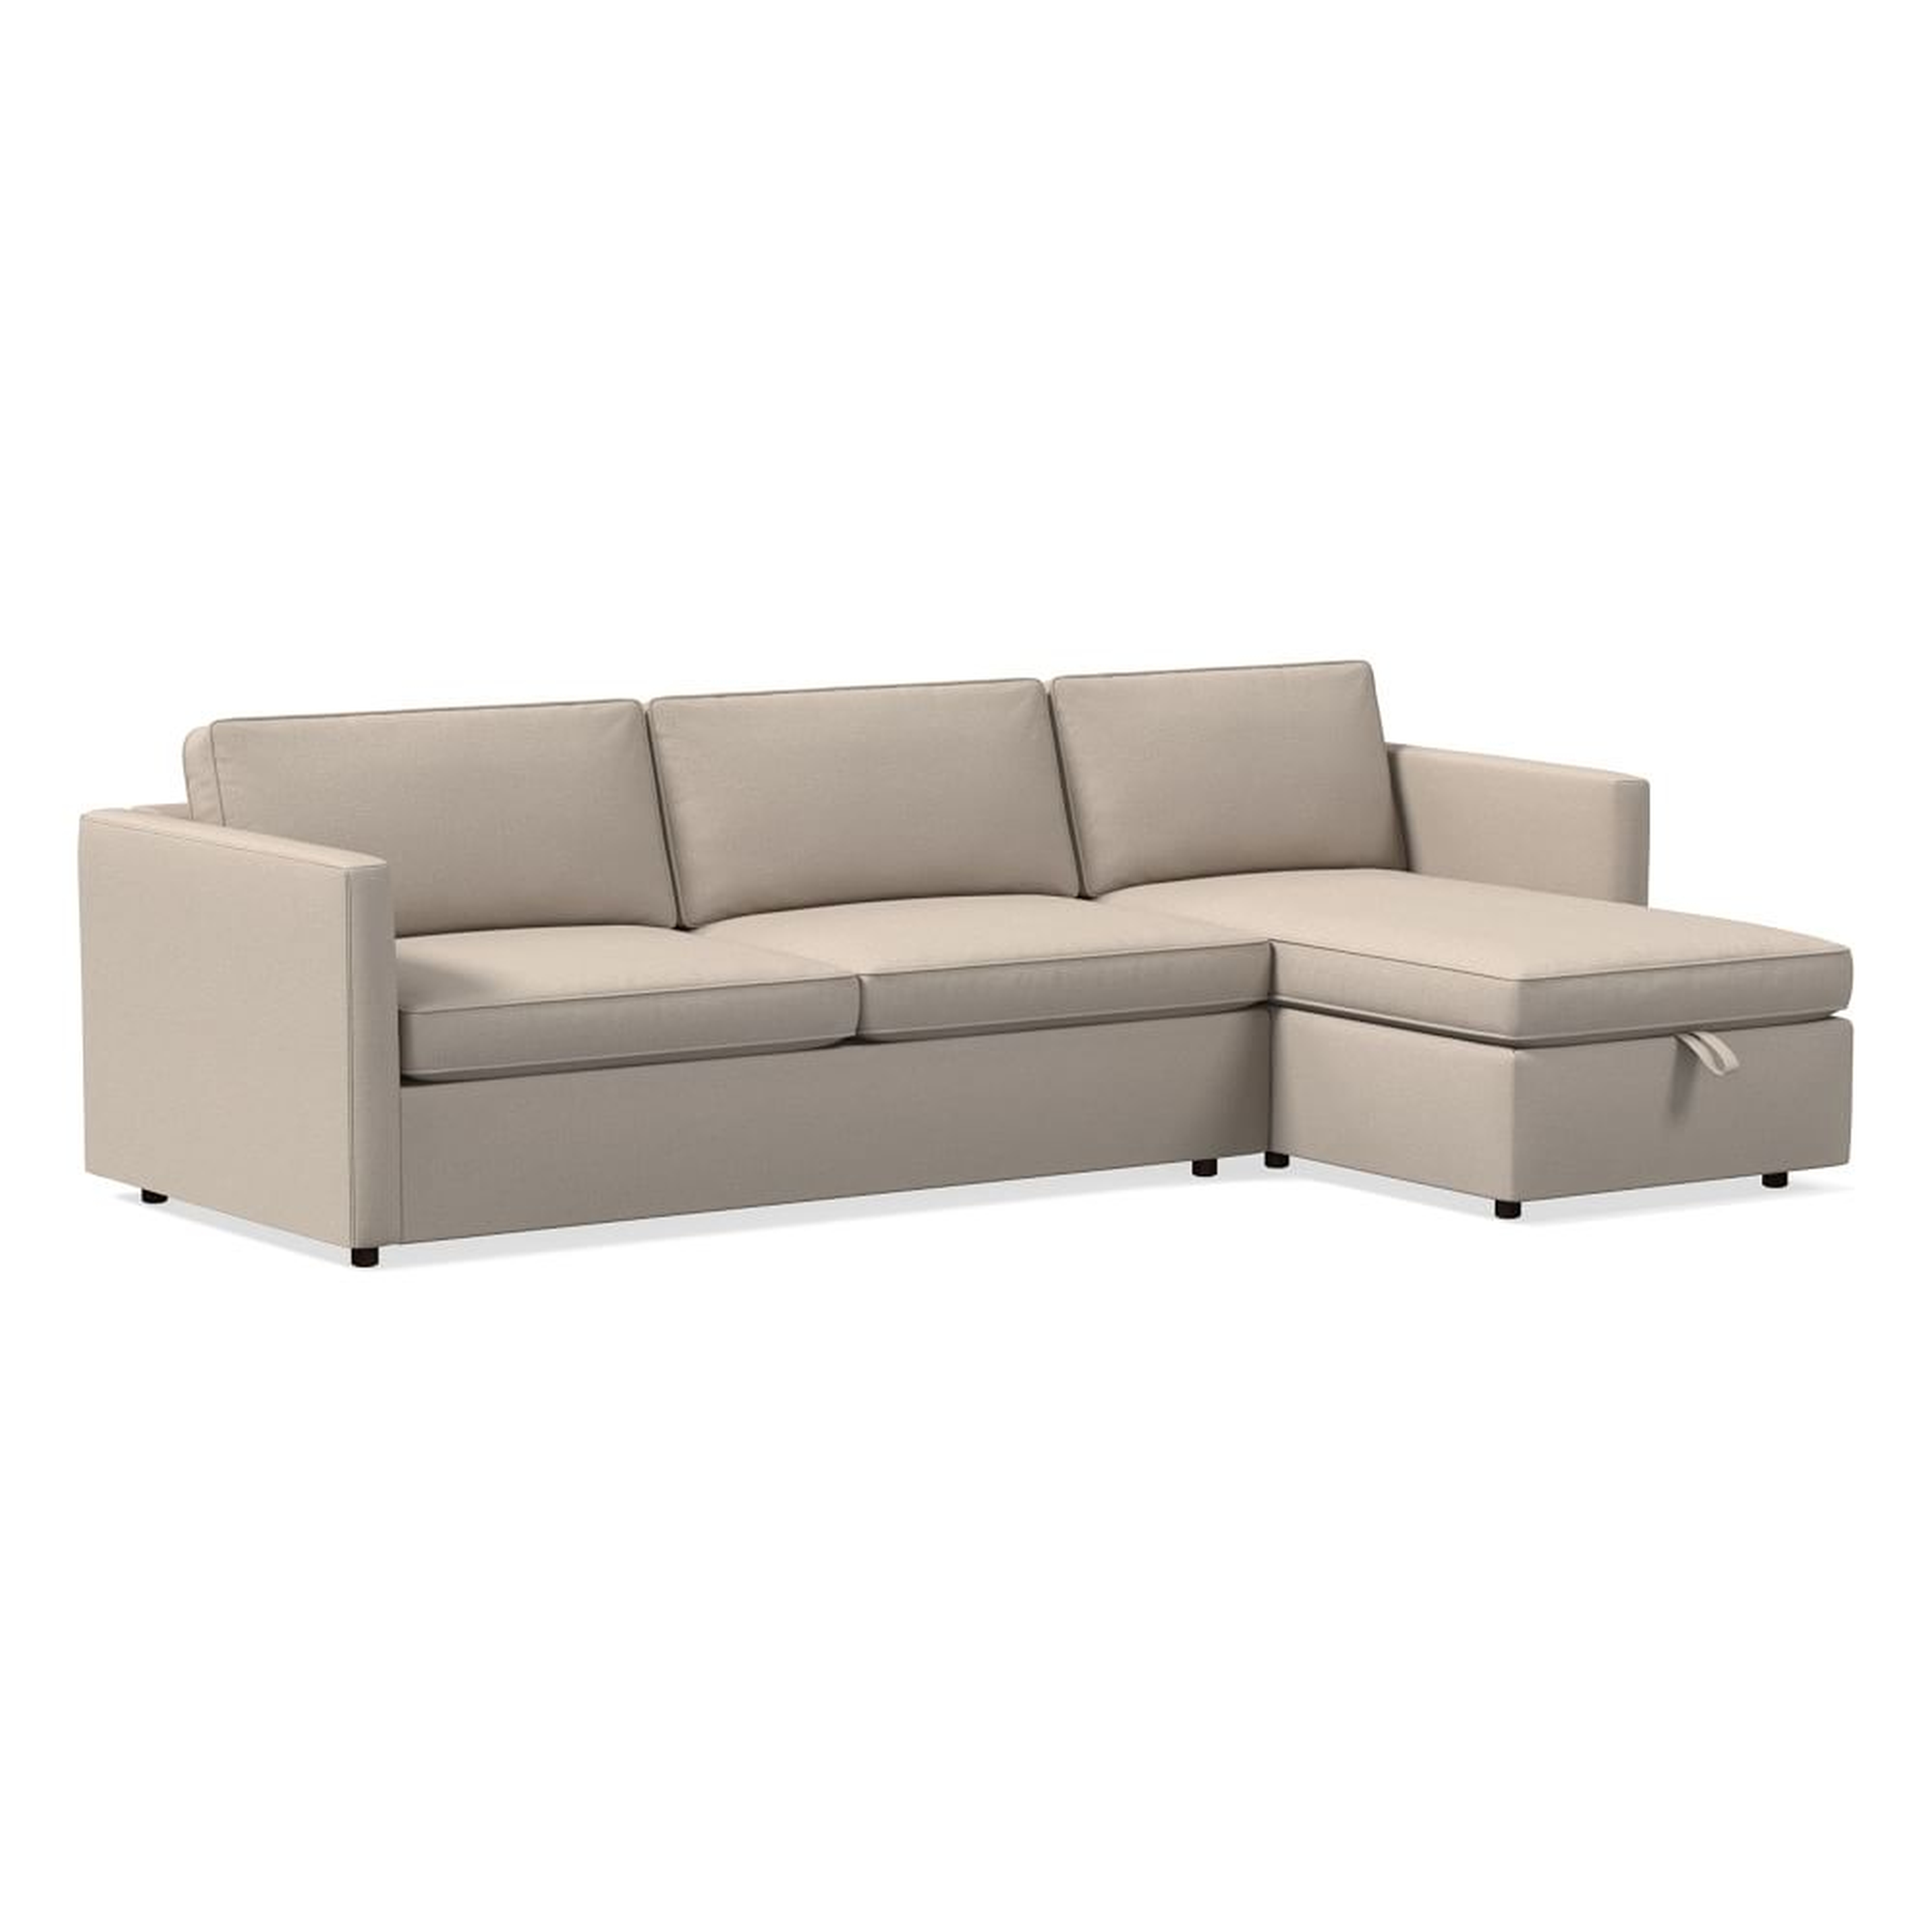 Harris 111" Right Multi Seat 2-Piece Chaise Sectional w/ Storage, Standard Depth, Yarn Dyed Linen Weave, Sand - West Elm